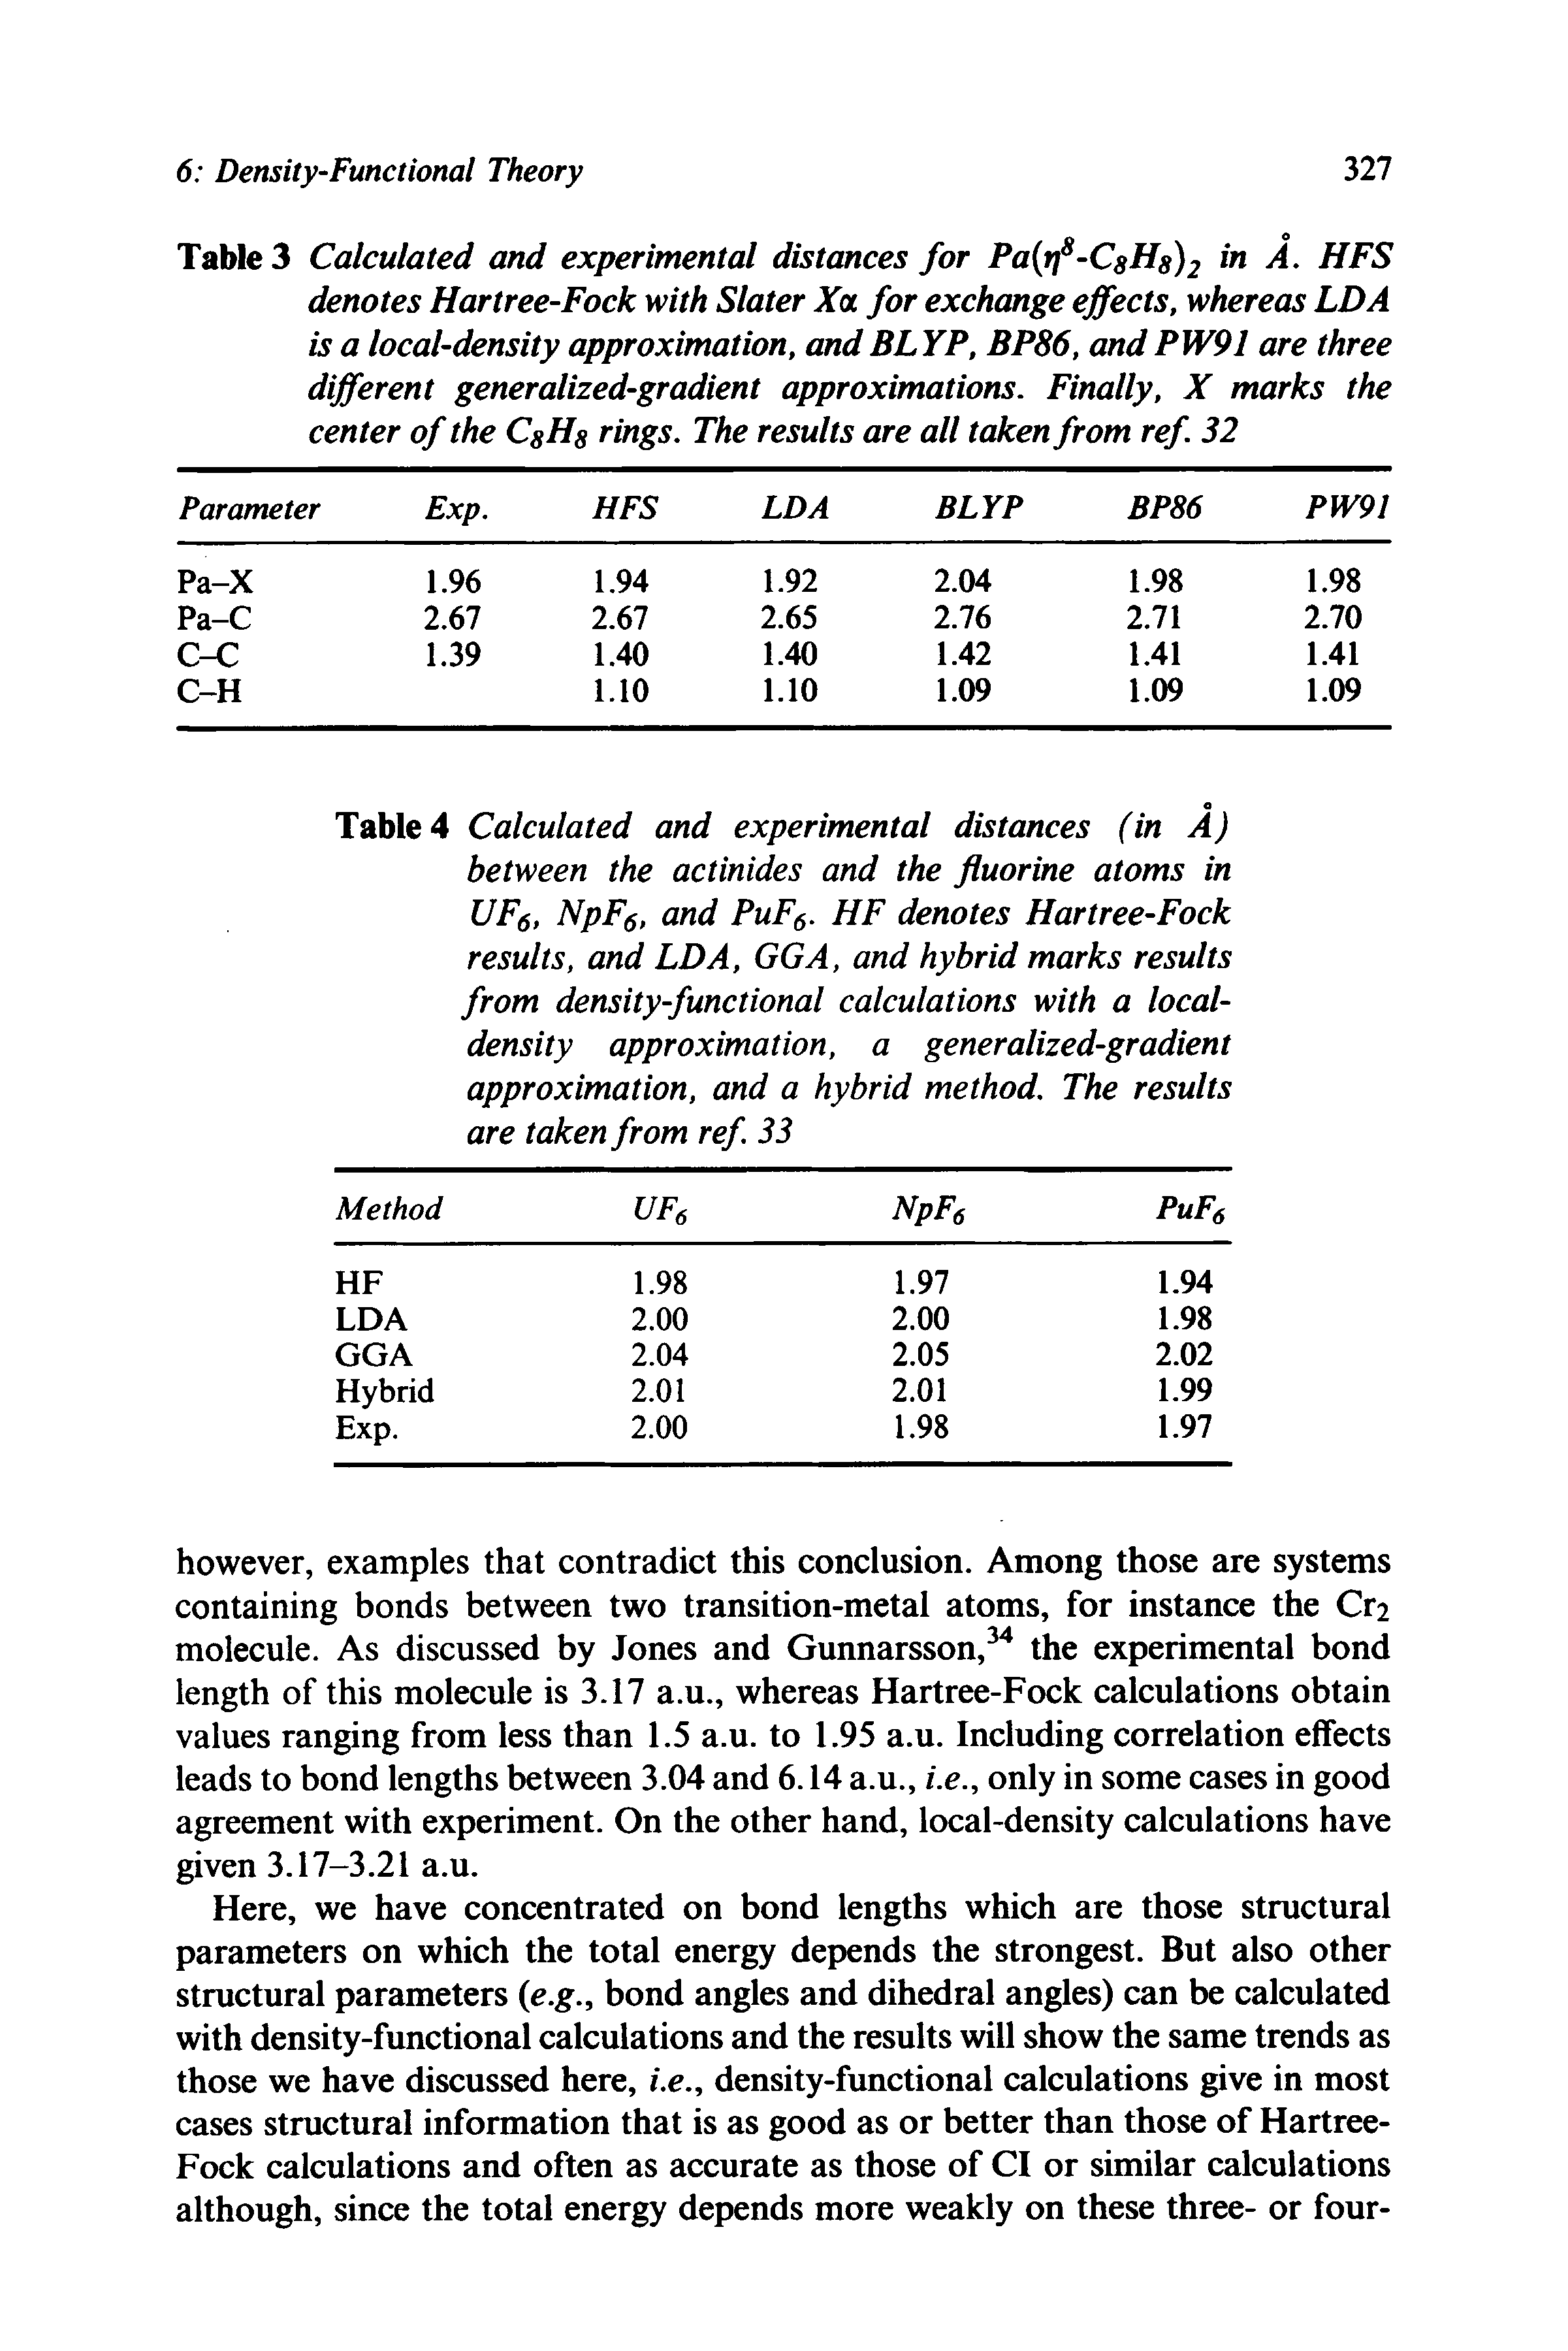 Table 4 Calculated and experimental distances (in A) between the actinides and the fluorine atoms in UF<, NpFg, and PuF6. HF denotes Hartree-Fock results, and LDA, GGA, and hybrid marks results from density-functional calculations with a local-density approximation, a generalized-gradient approximation, and a hybrid method. The results are taken from ref 33...